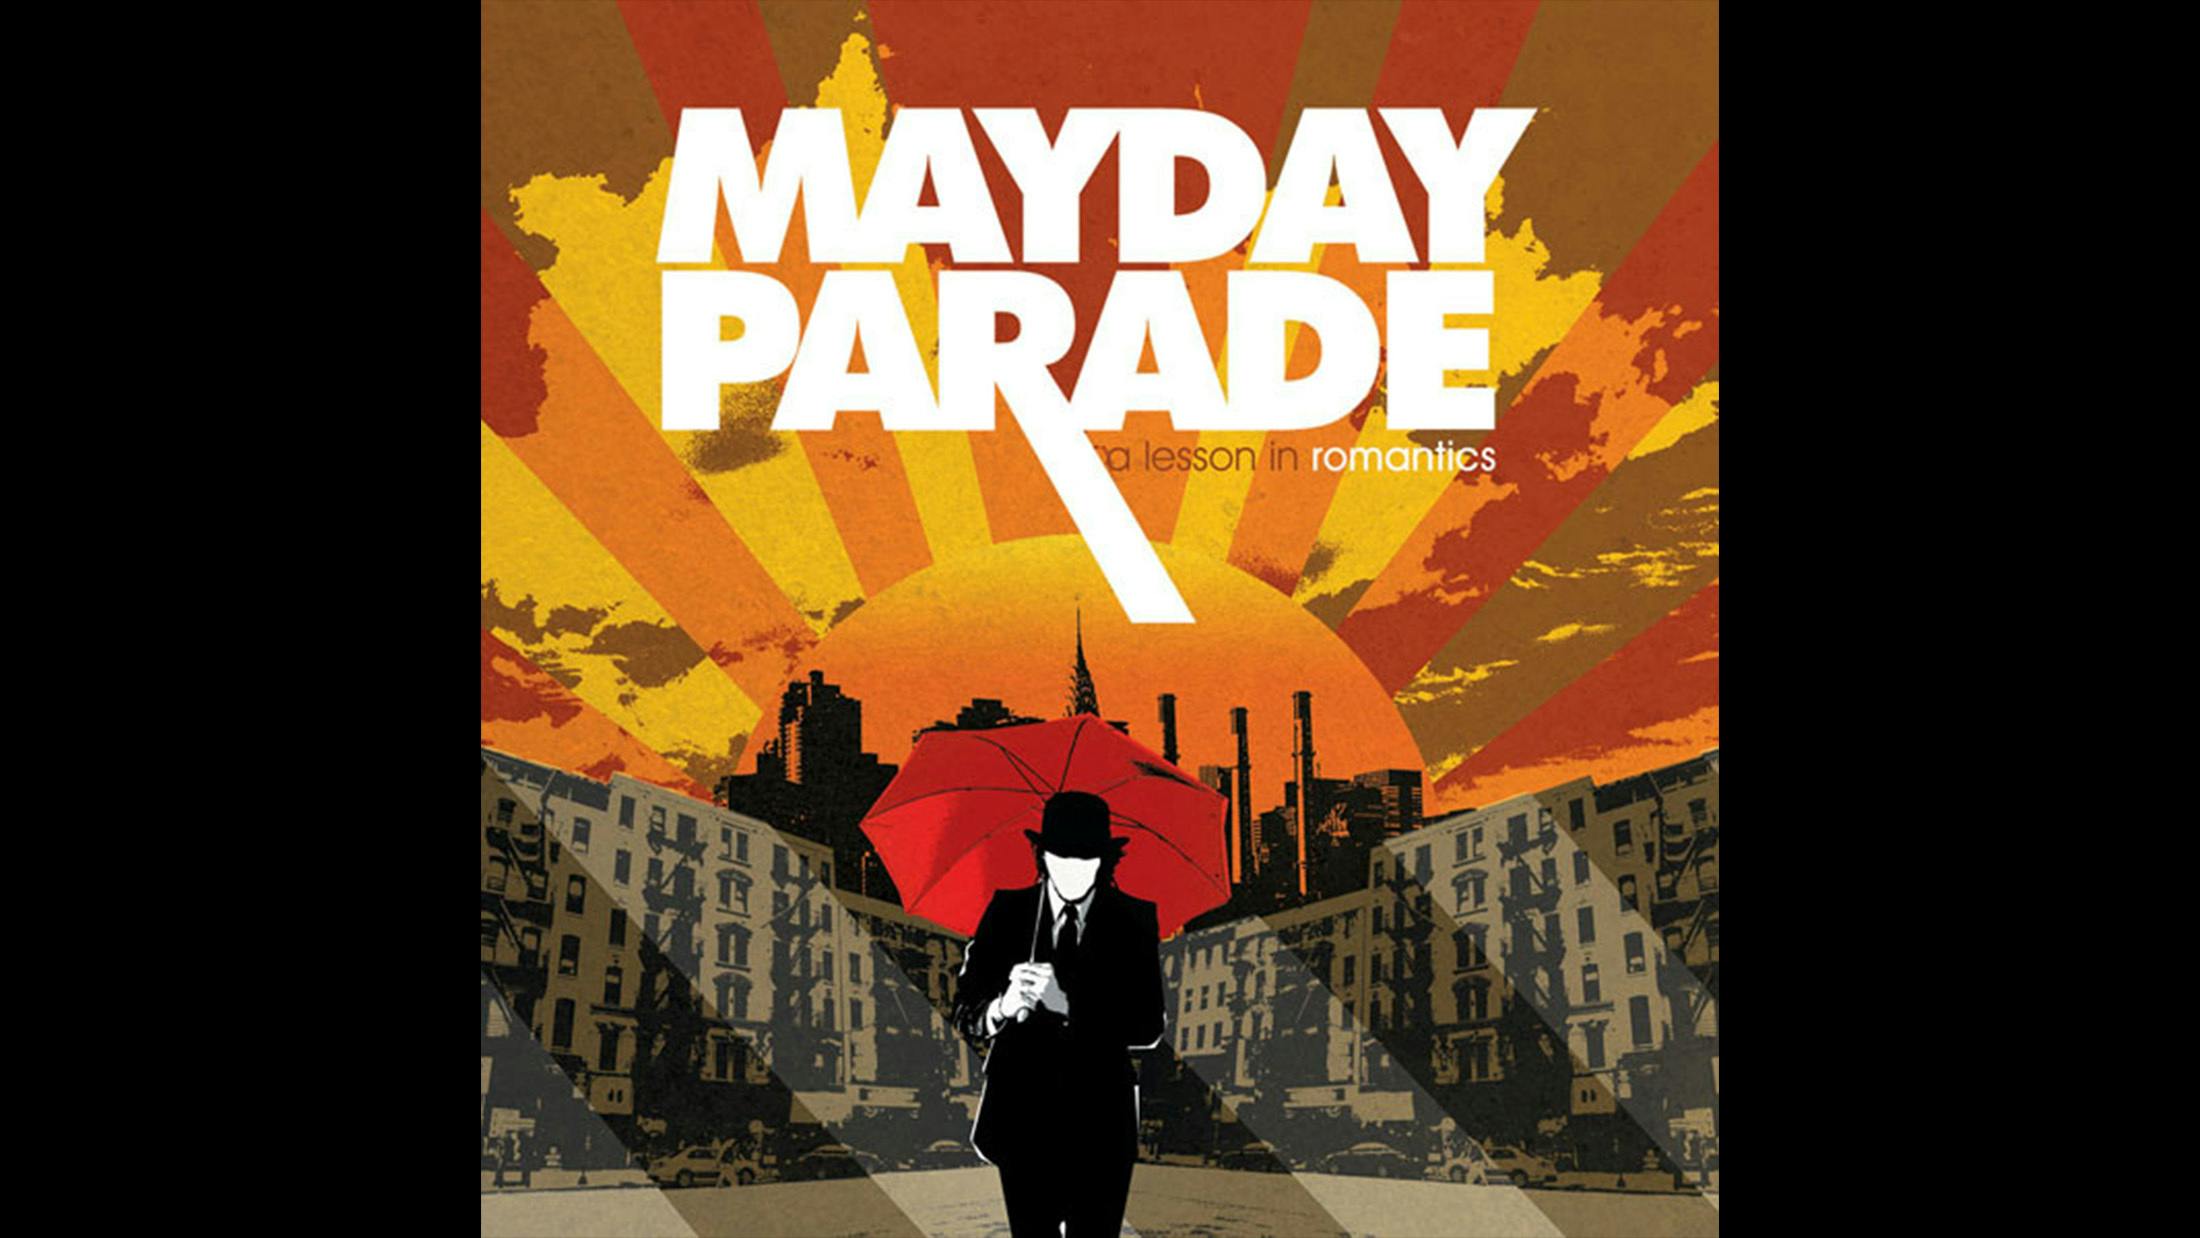 Lightning never strikes twice, and neither do vocal pairings as incredible as Mayday Parade’s Derek Sanders and Jason Lancaster, since the latter left the band before this 2007 album even came out. Still, he left us with a record full of hopelessly romantic pop-punk so good it’ll make your heart hurt (if it isn’t hurting already).